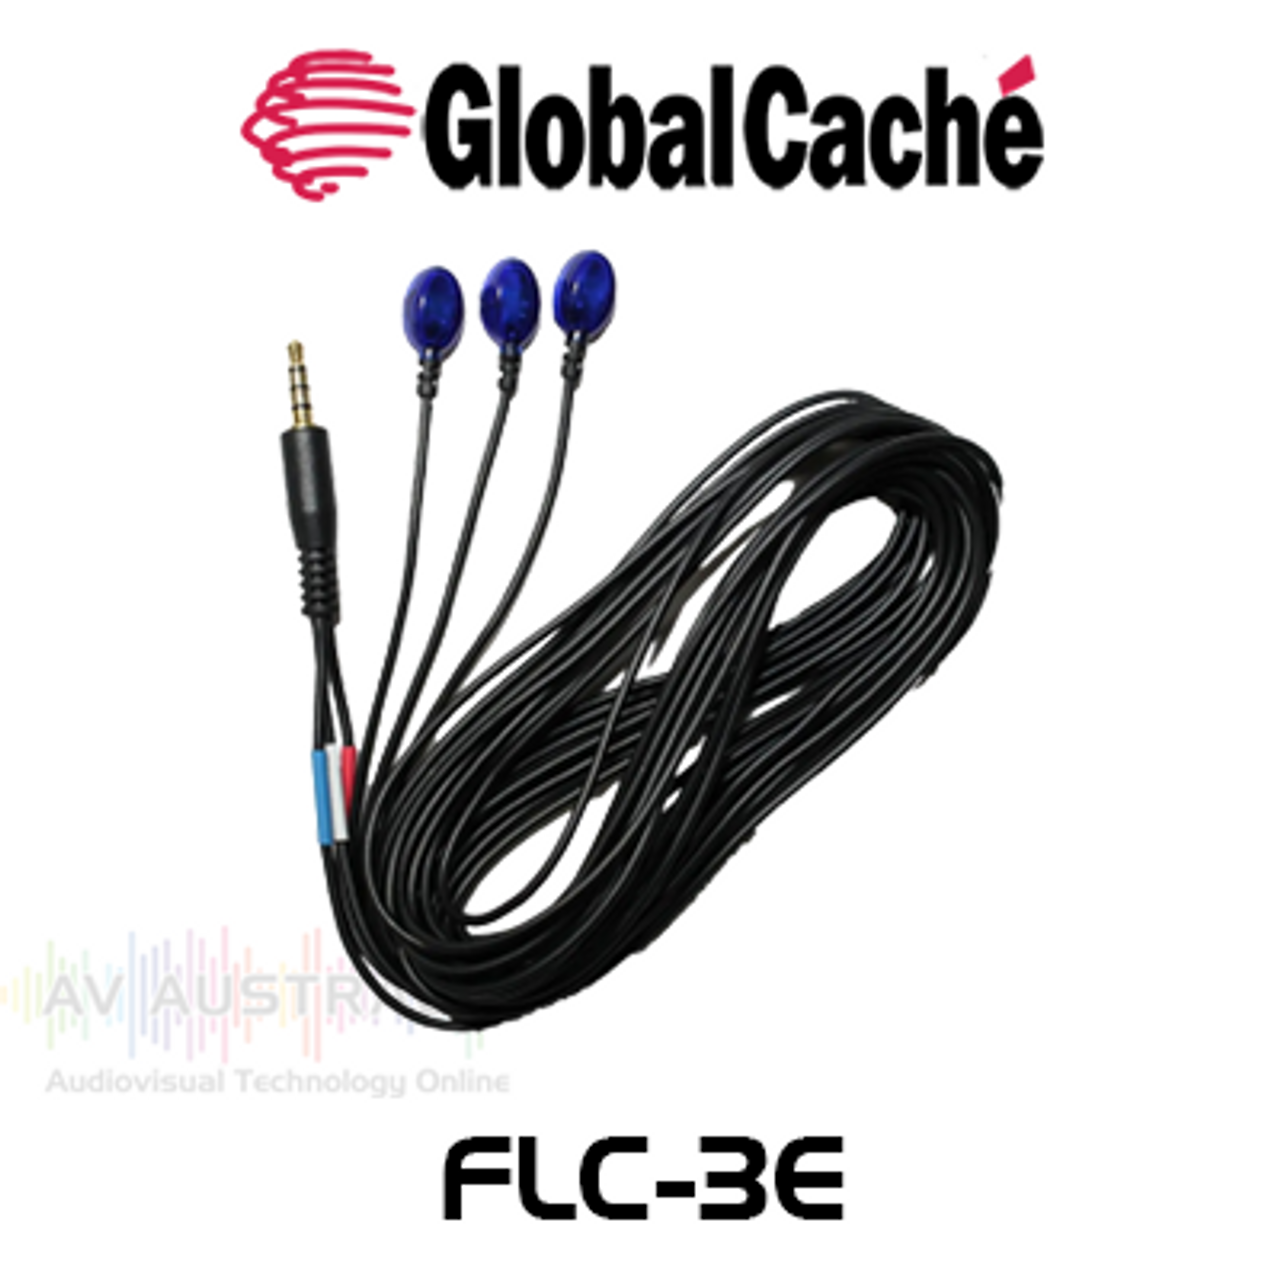 Global Cache iTach Flex Link Tripple Infrared Emitter Cable